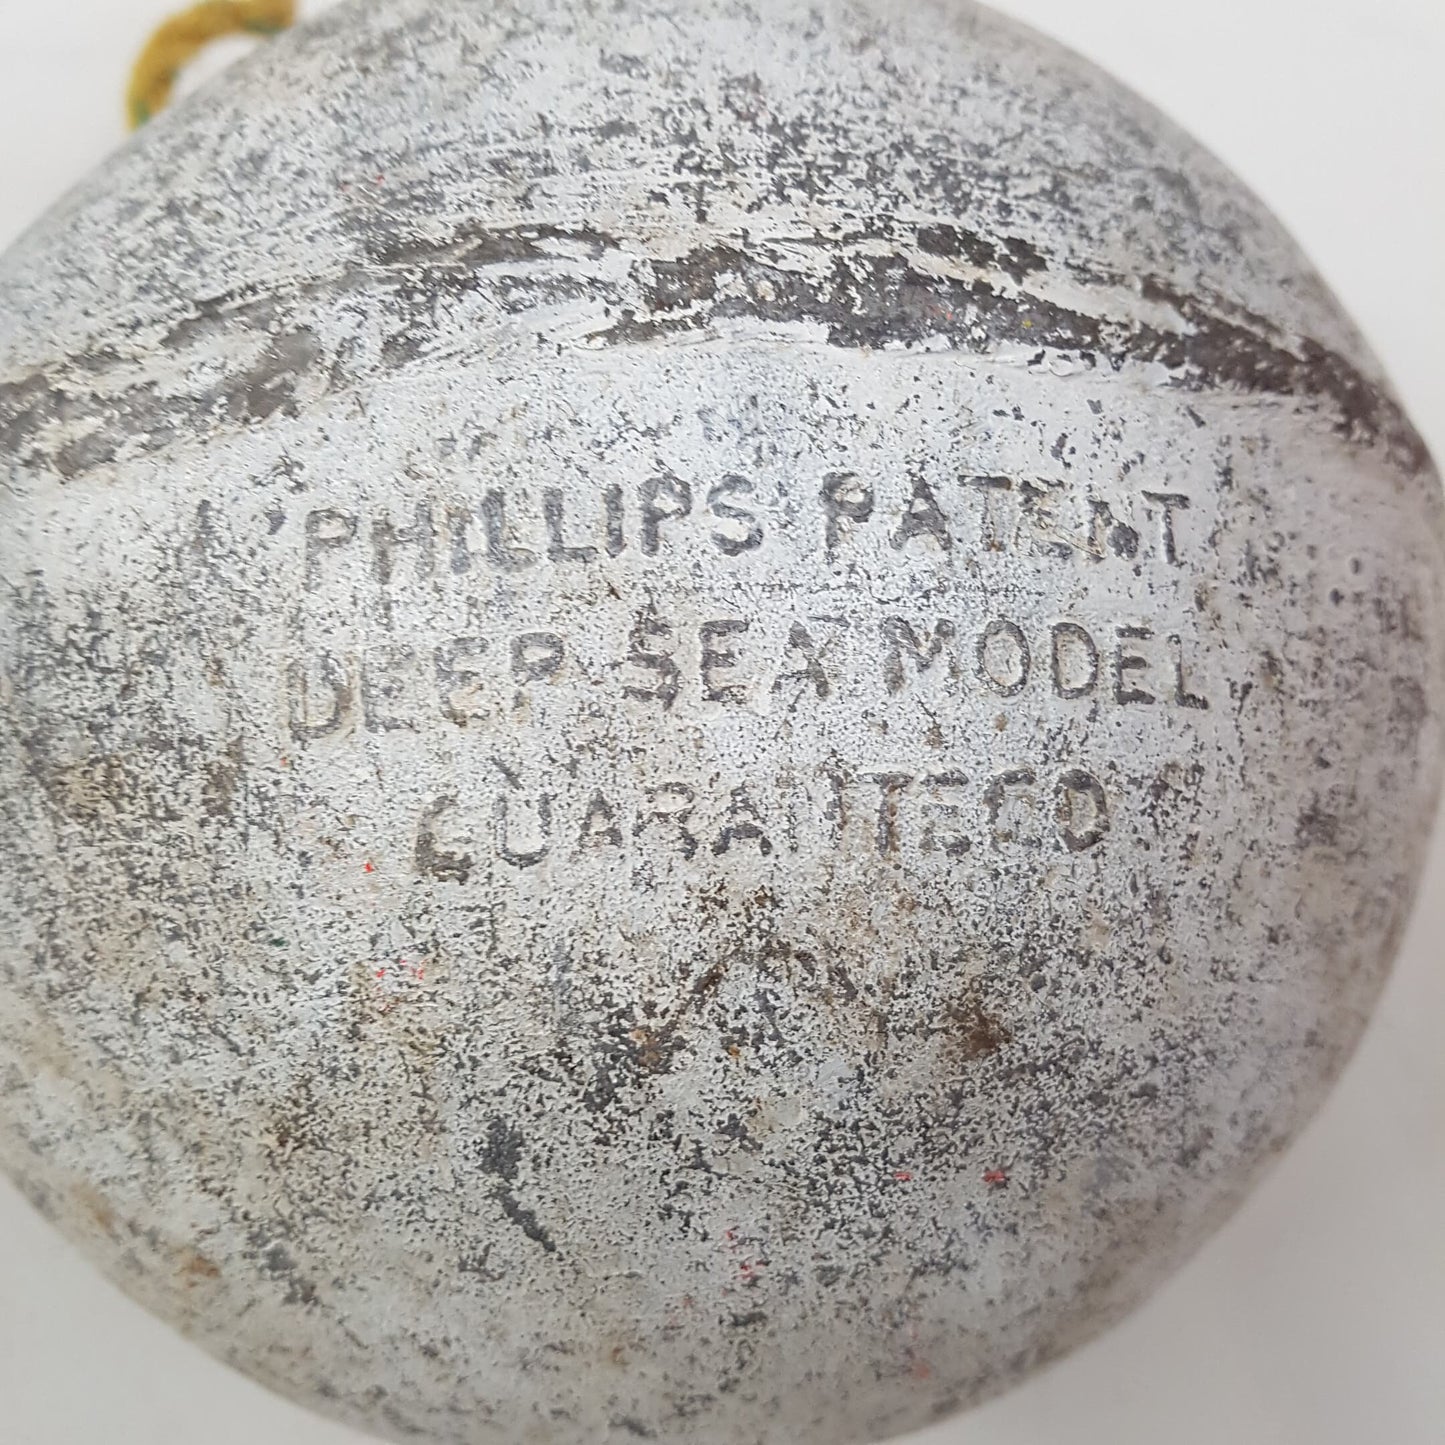 antique nautical fishing buoy / float newfoundland / maine lobster fishing made by phillips deep sea model